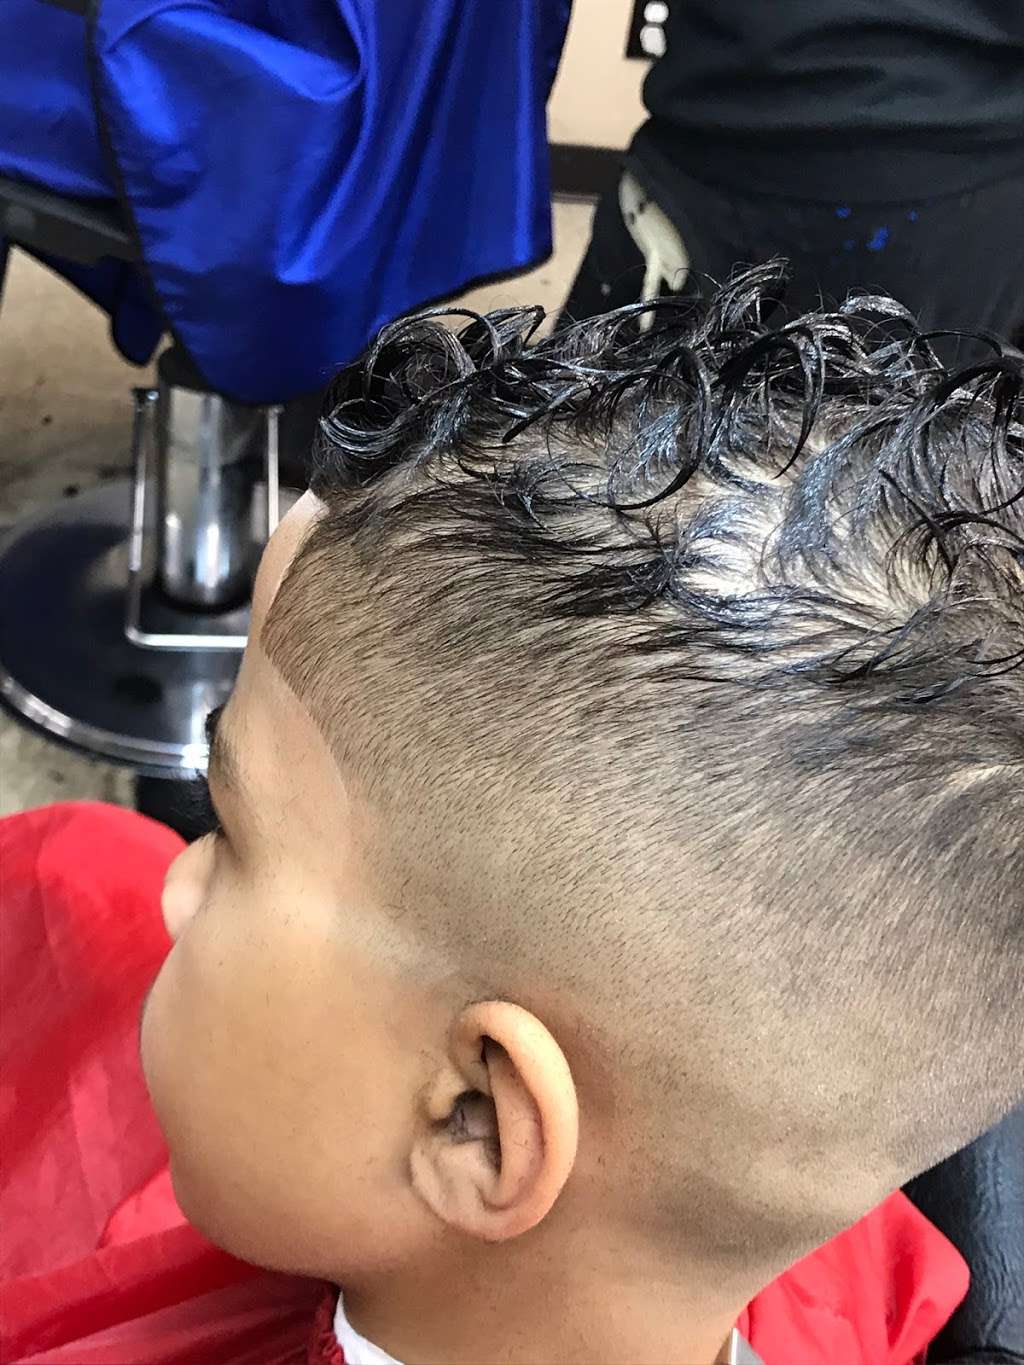 Compton Beauty and barber shop | in the backCompton, 324 W Alondra Blvd unit b, Compton, CA 90220 | Phone: (310) 408-7953